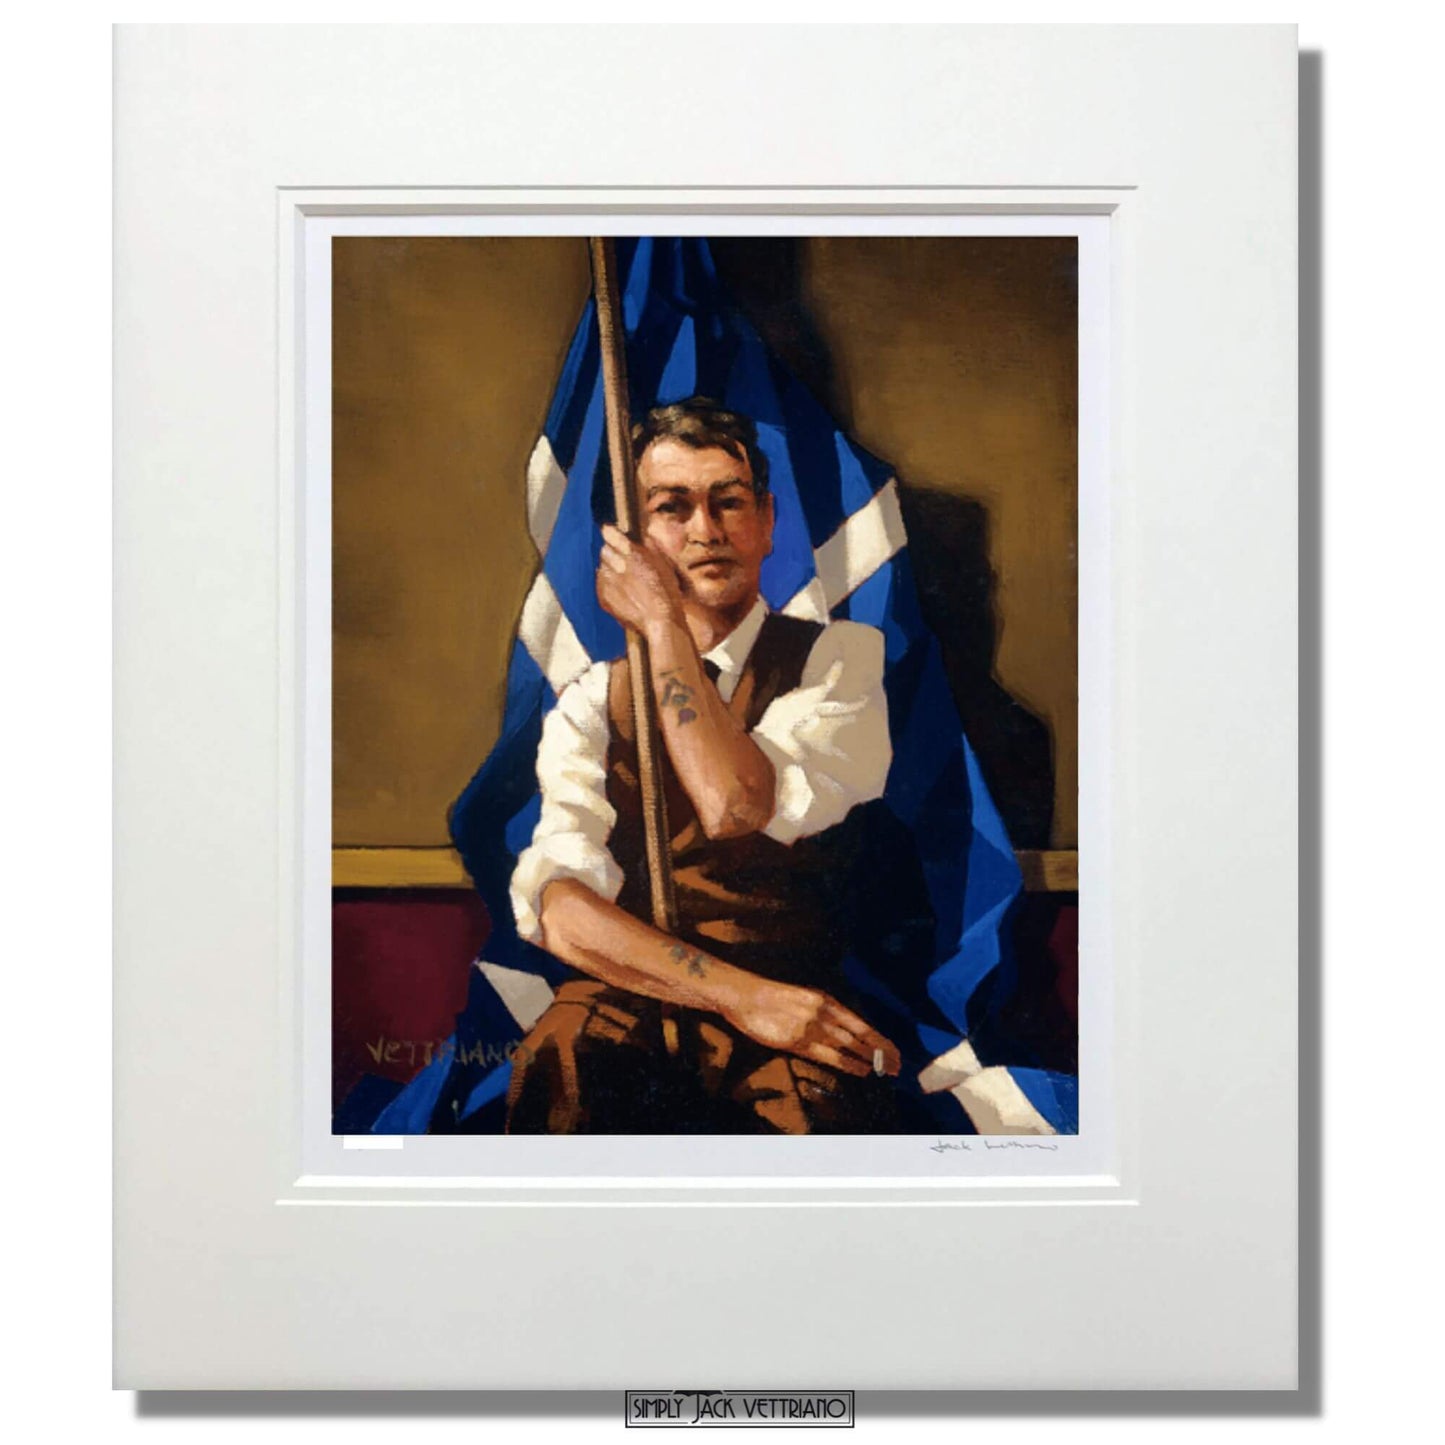 The Nationalist by Jack Vettriano Mounted